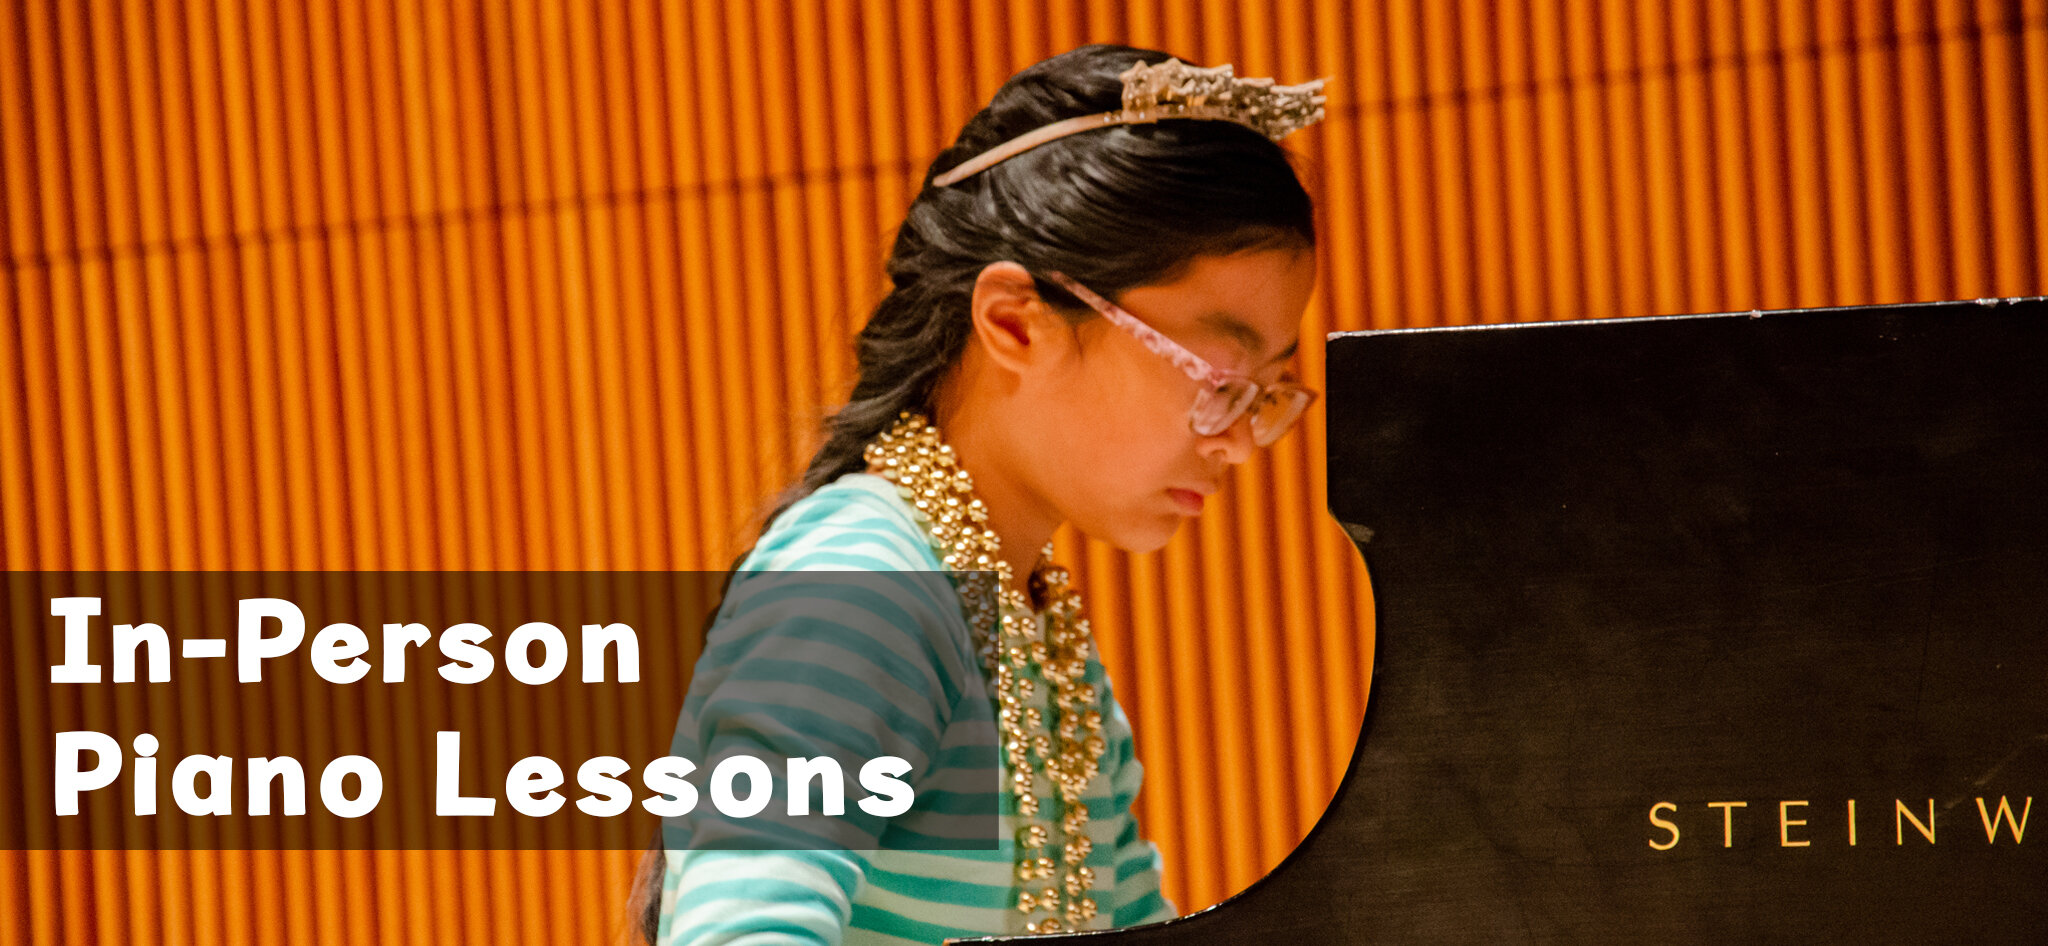 Fort Lee School of Music-In-Person Piano Lessons